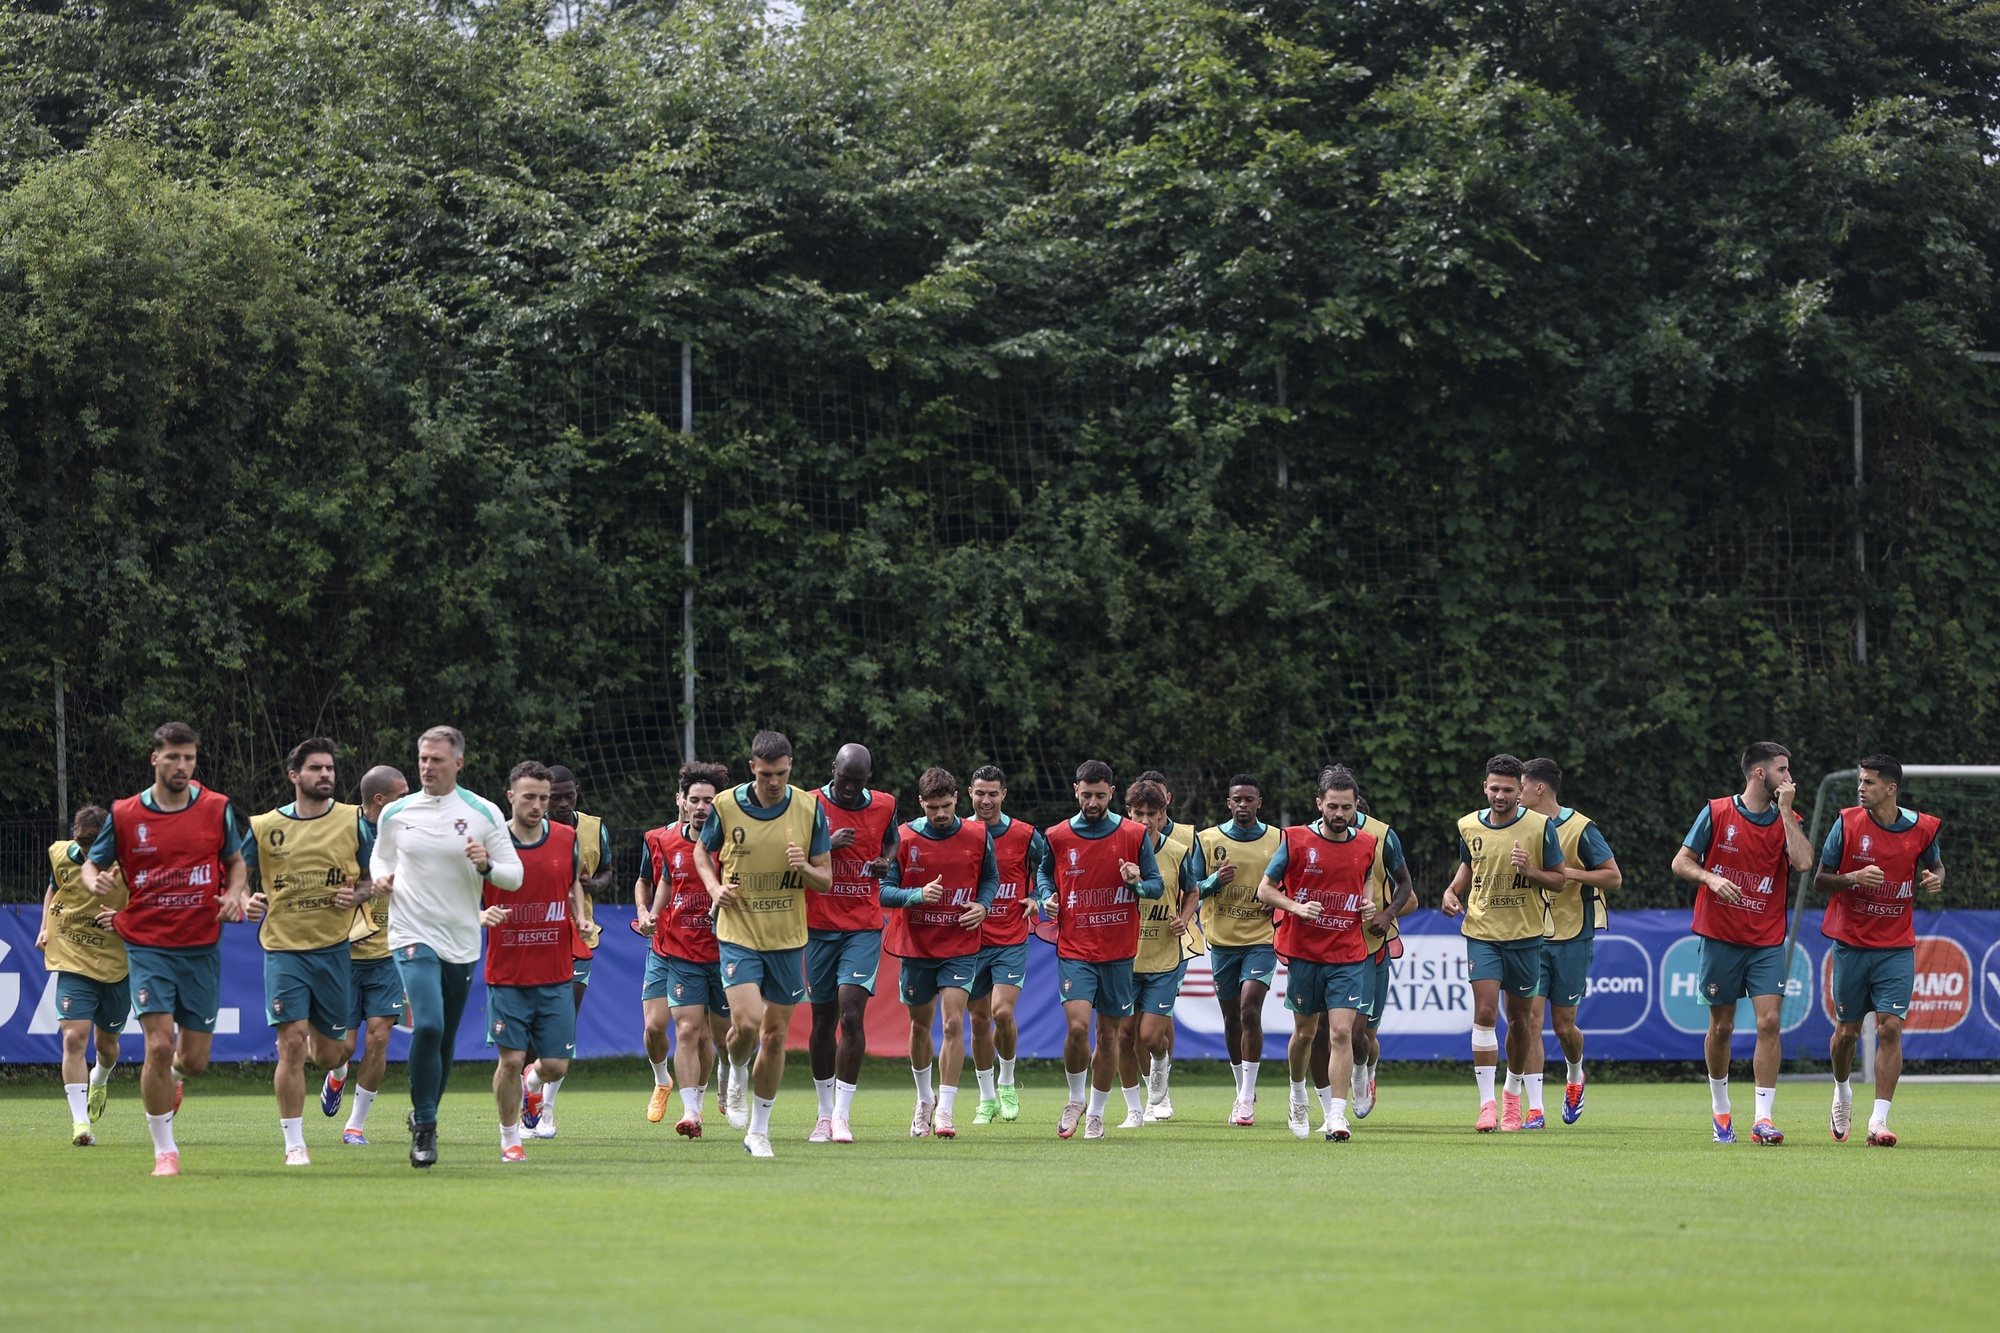 Portugal national soccer players during a training session in Marienfeld, Harsewinkel, Germany, 21 June 2024. The Portuguese national soccer team is based in Marienfeld, Harsewinkel during the UEFA EURO 2024. MIGUEL A. LOPES/LUSA